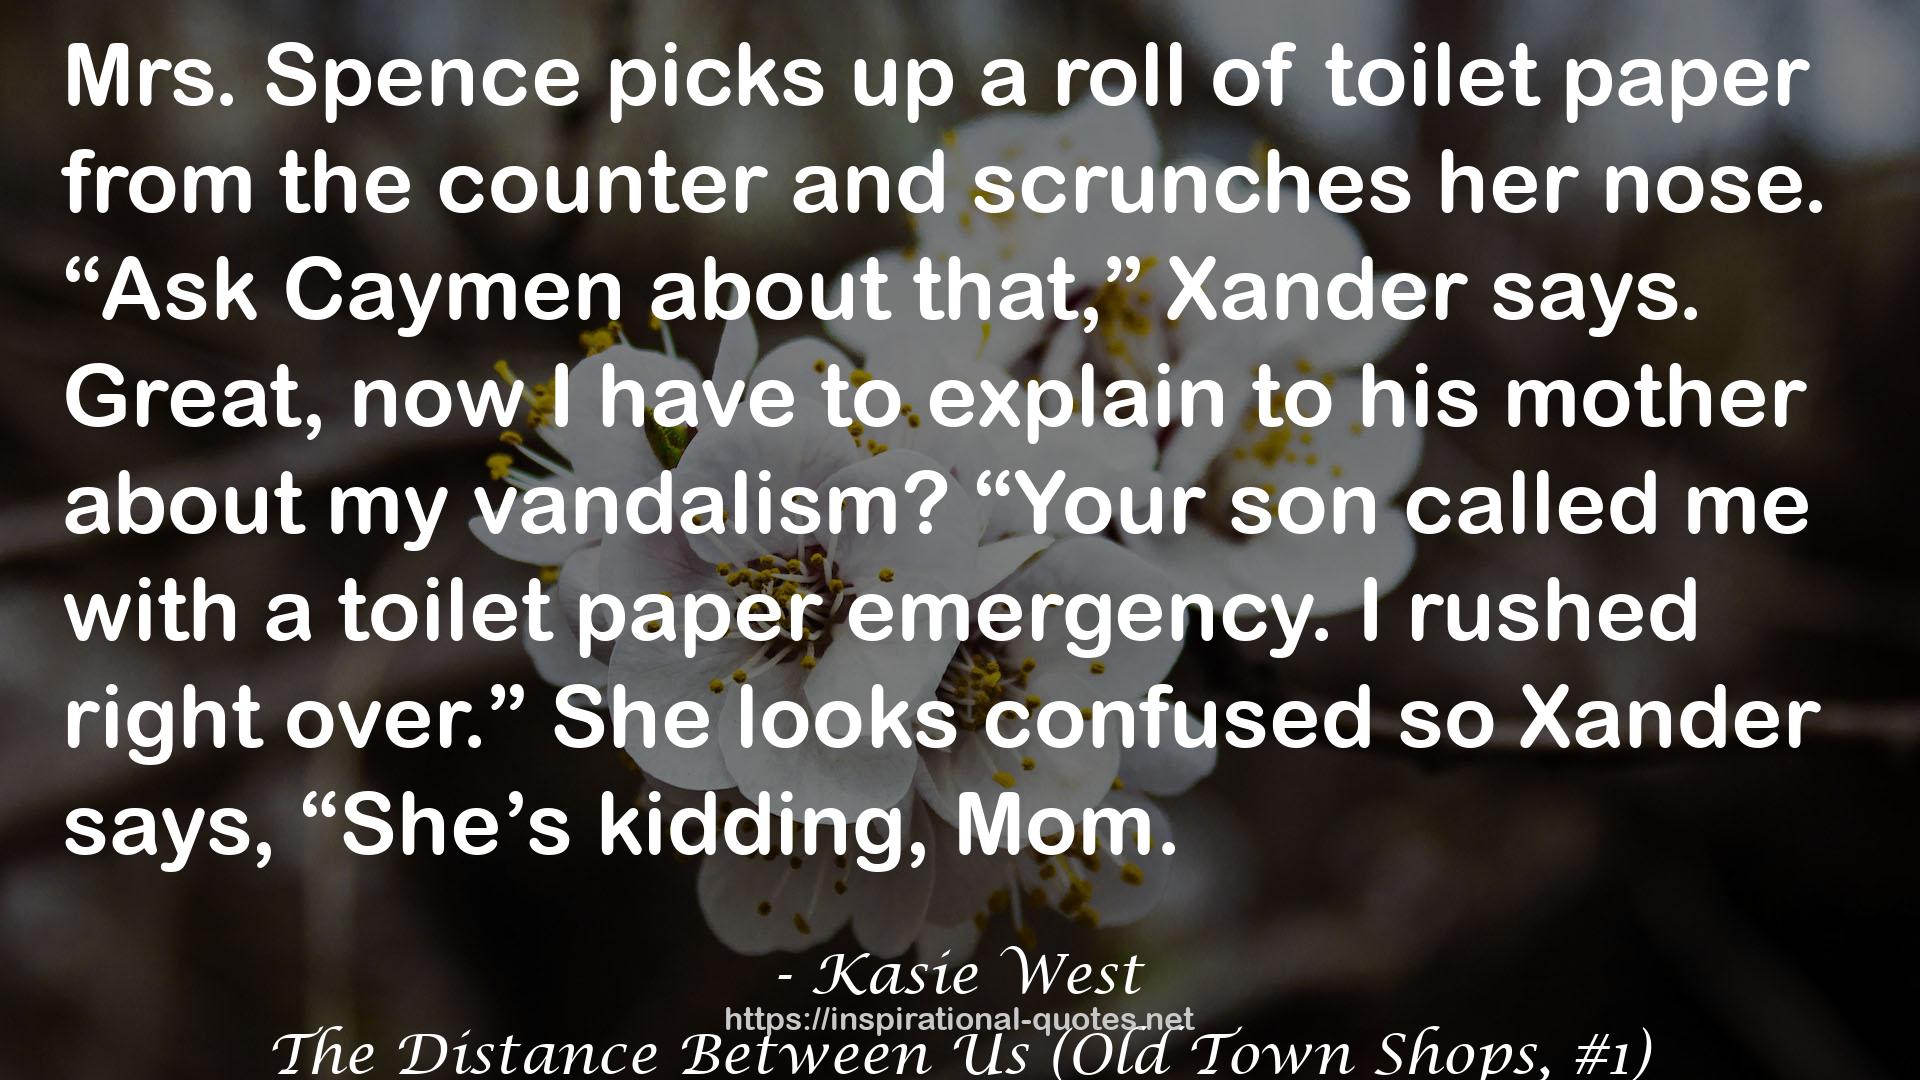 The Distance Between Us (Old Town Shops, #1) QUOTES